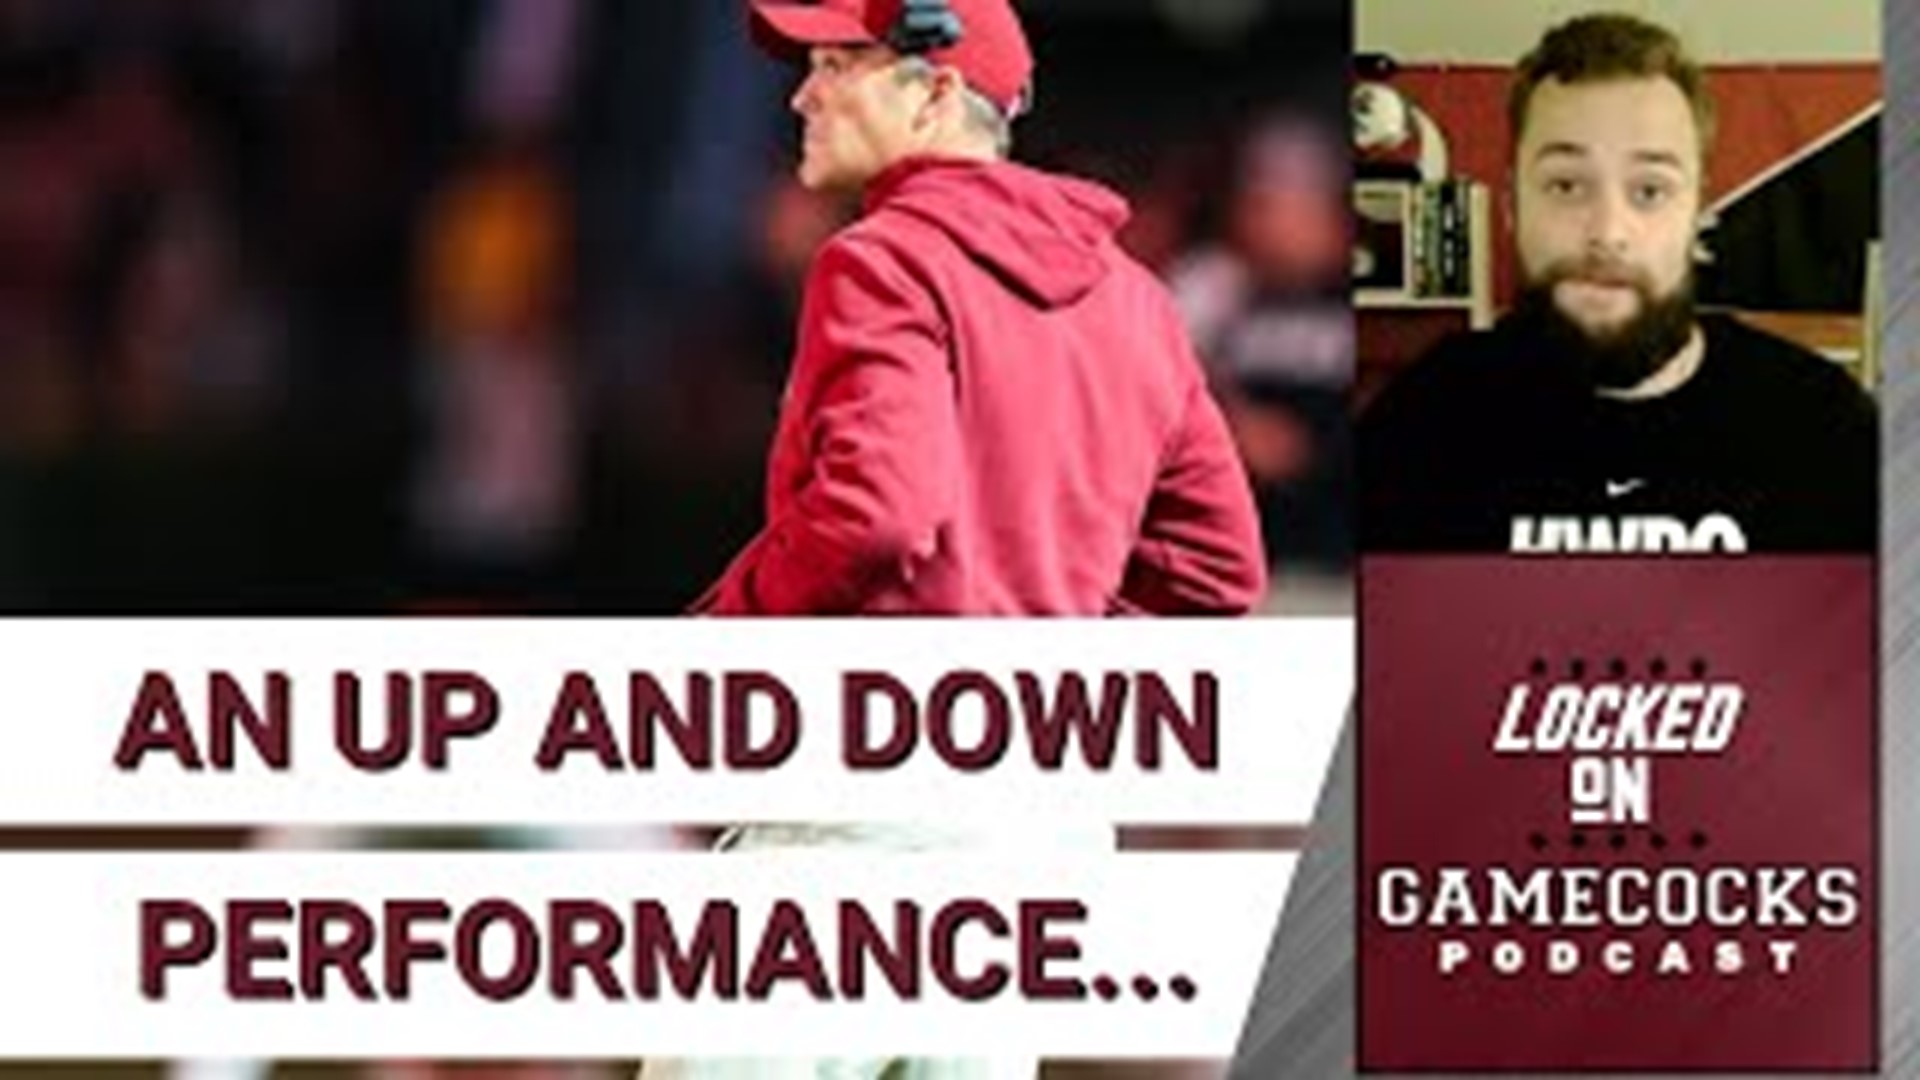 Andrew gives his thoughts on how Shane Beamer's South Carolina Gamecocks performed against Buddy Pough's South Carolina State Bulldogs.